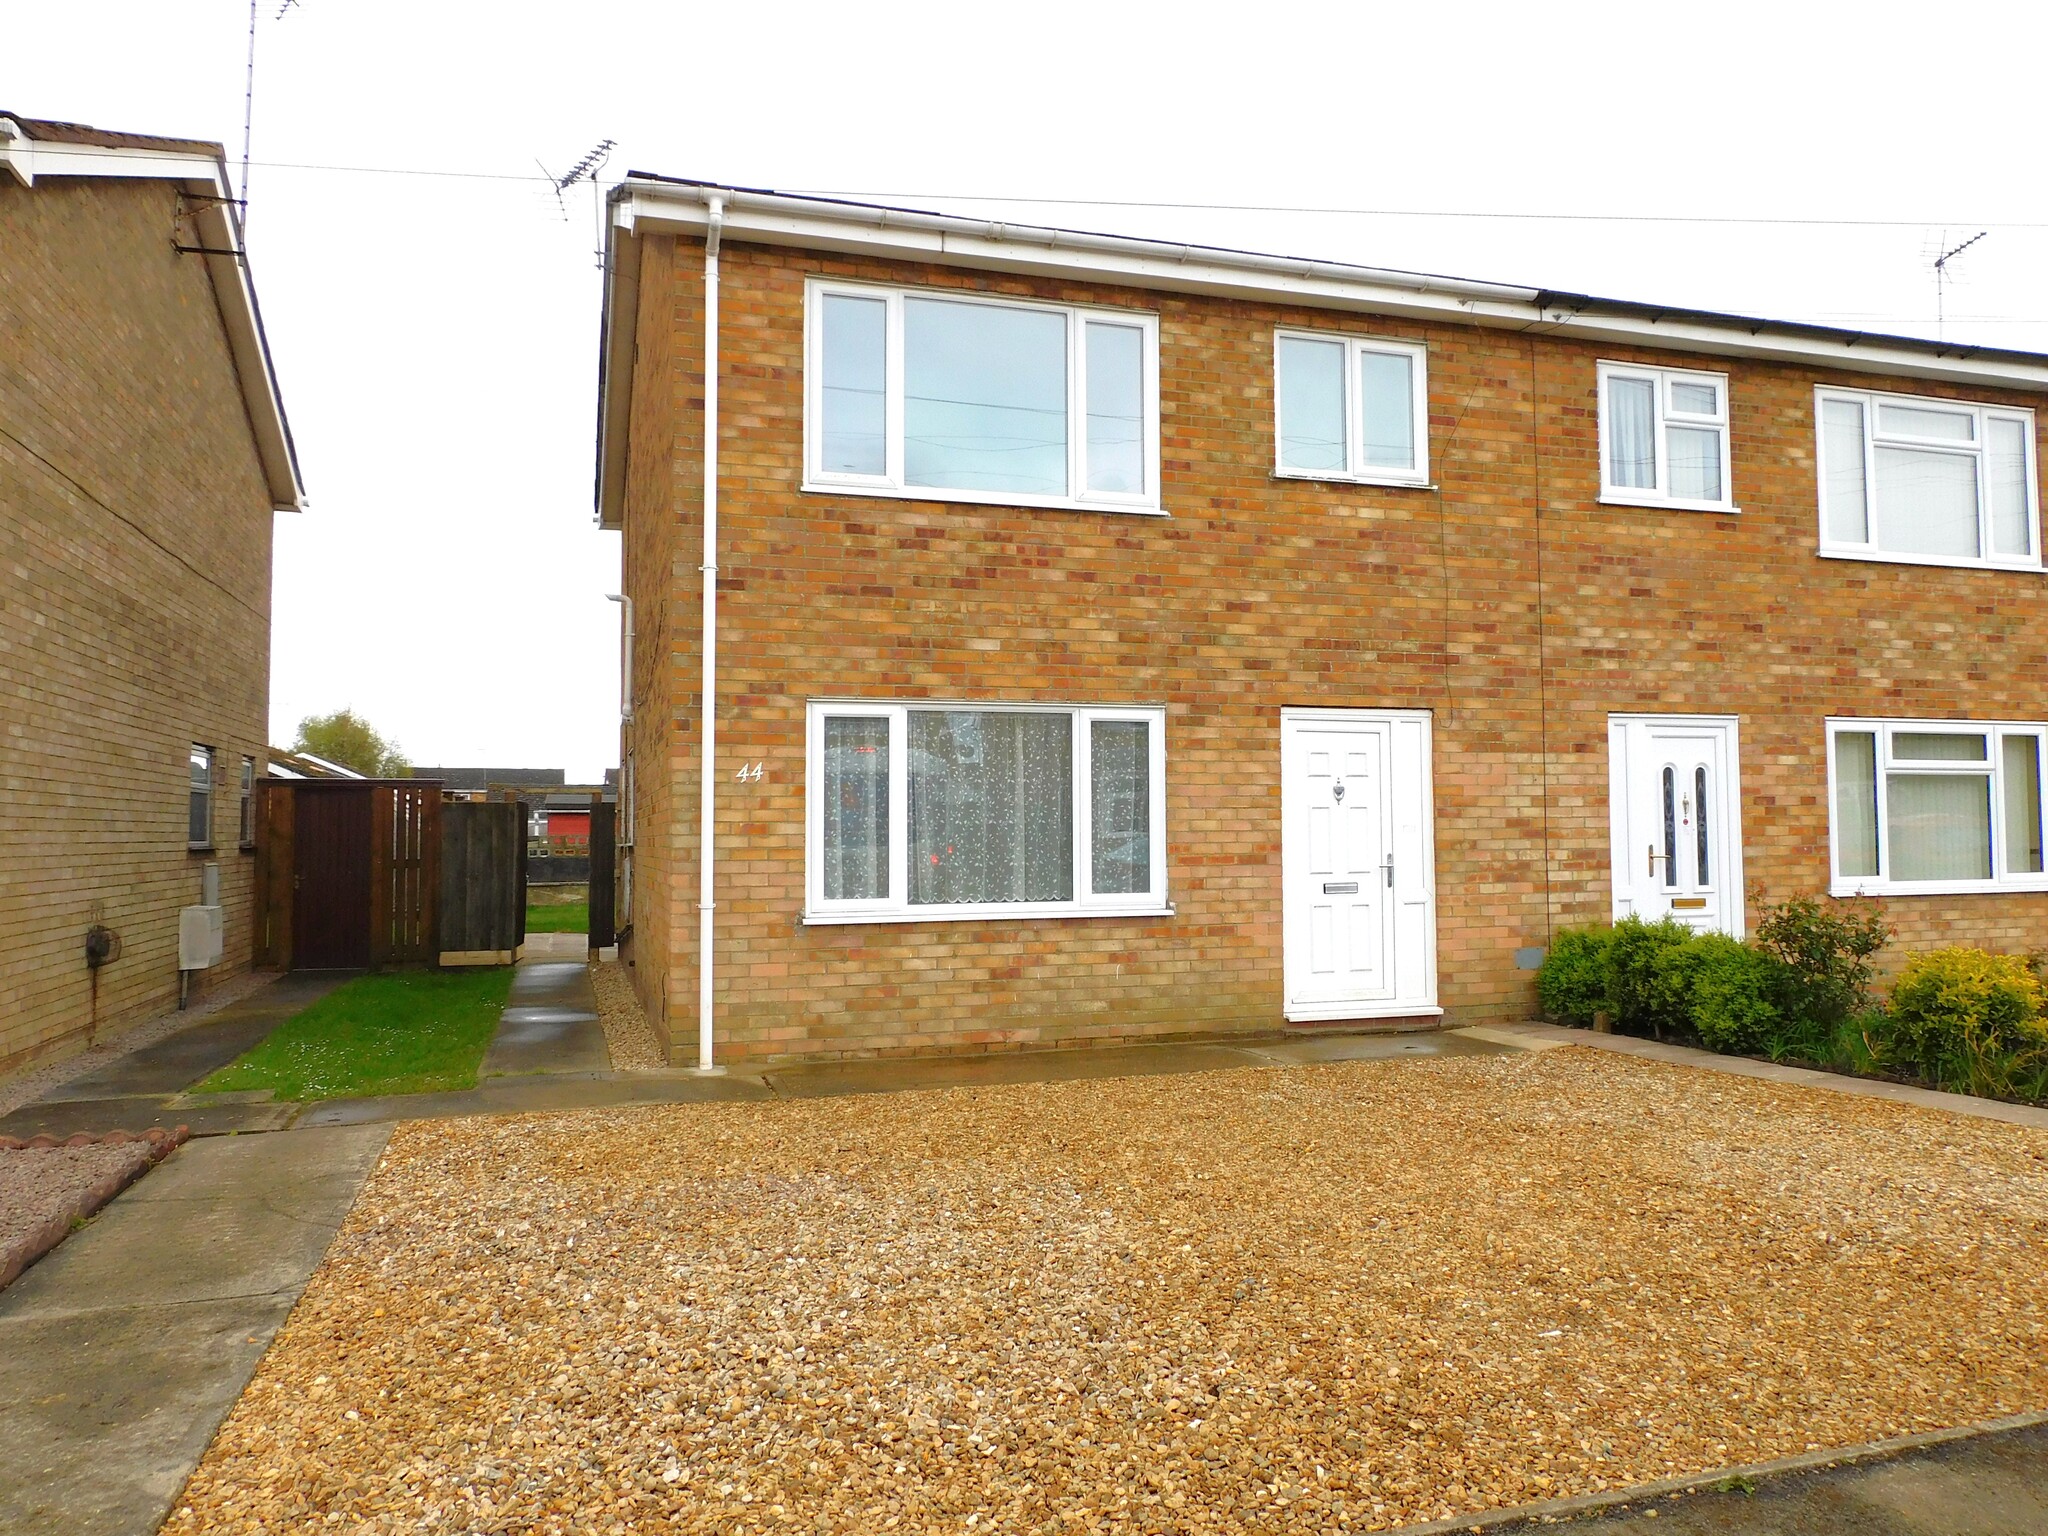 3 bed Semi Detached for rent in Holbeach. From Lets Get you Moving.co.uk - Holbeach